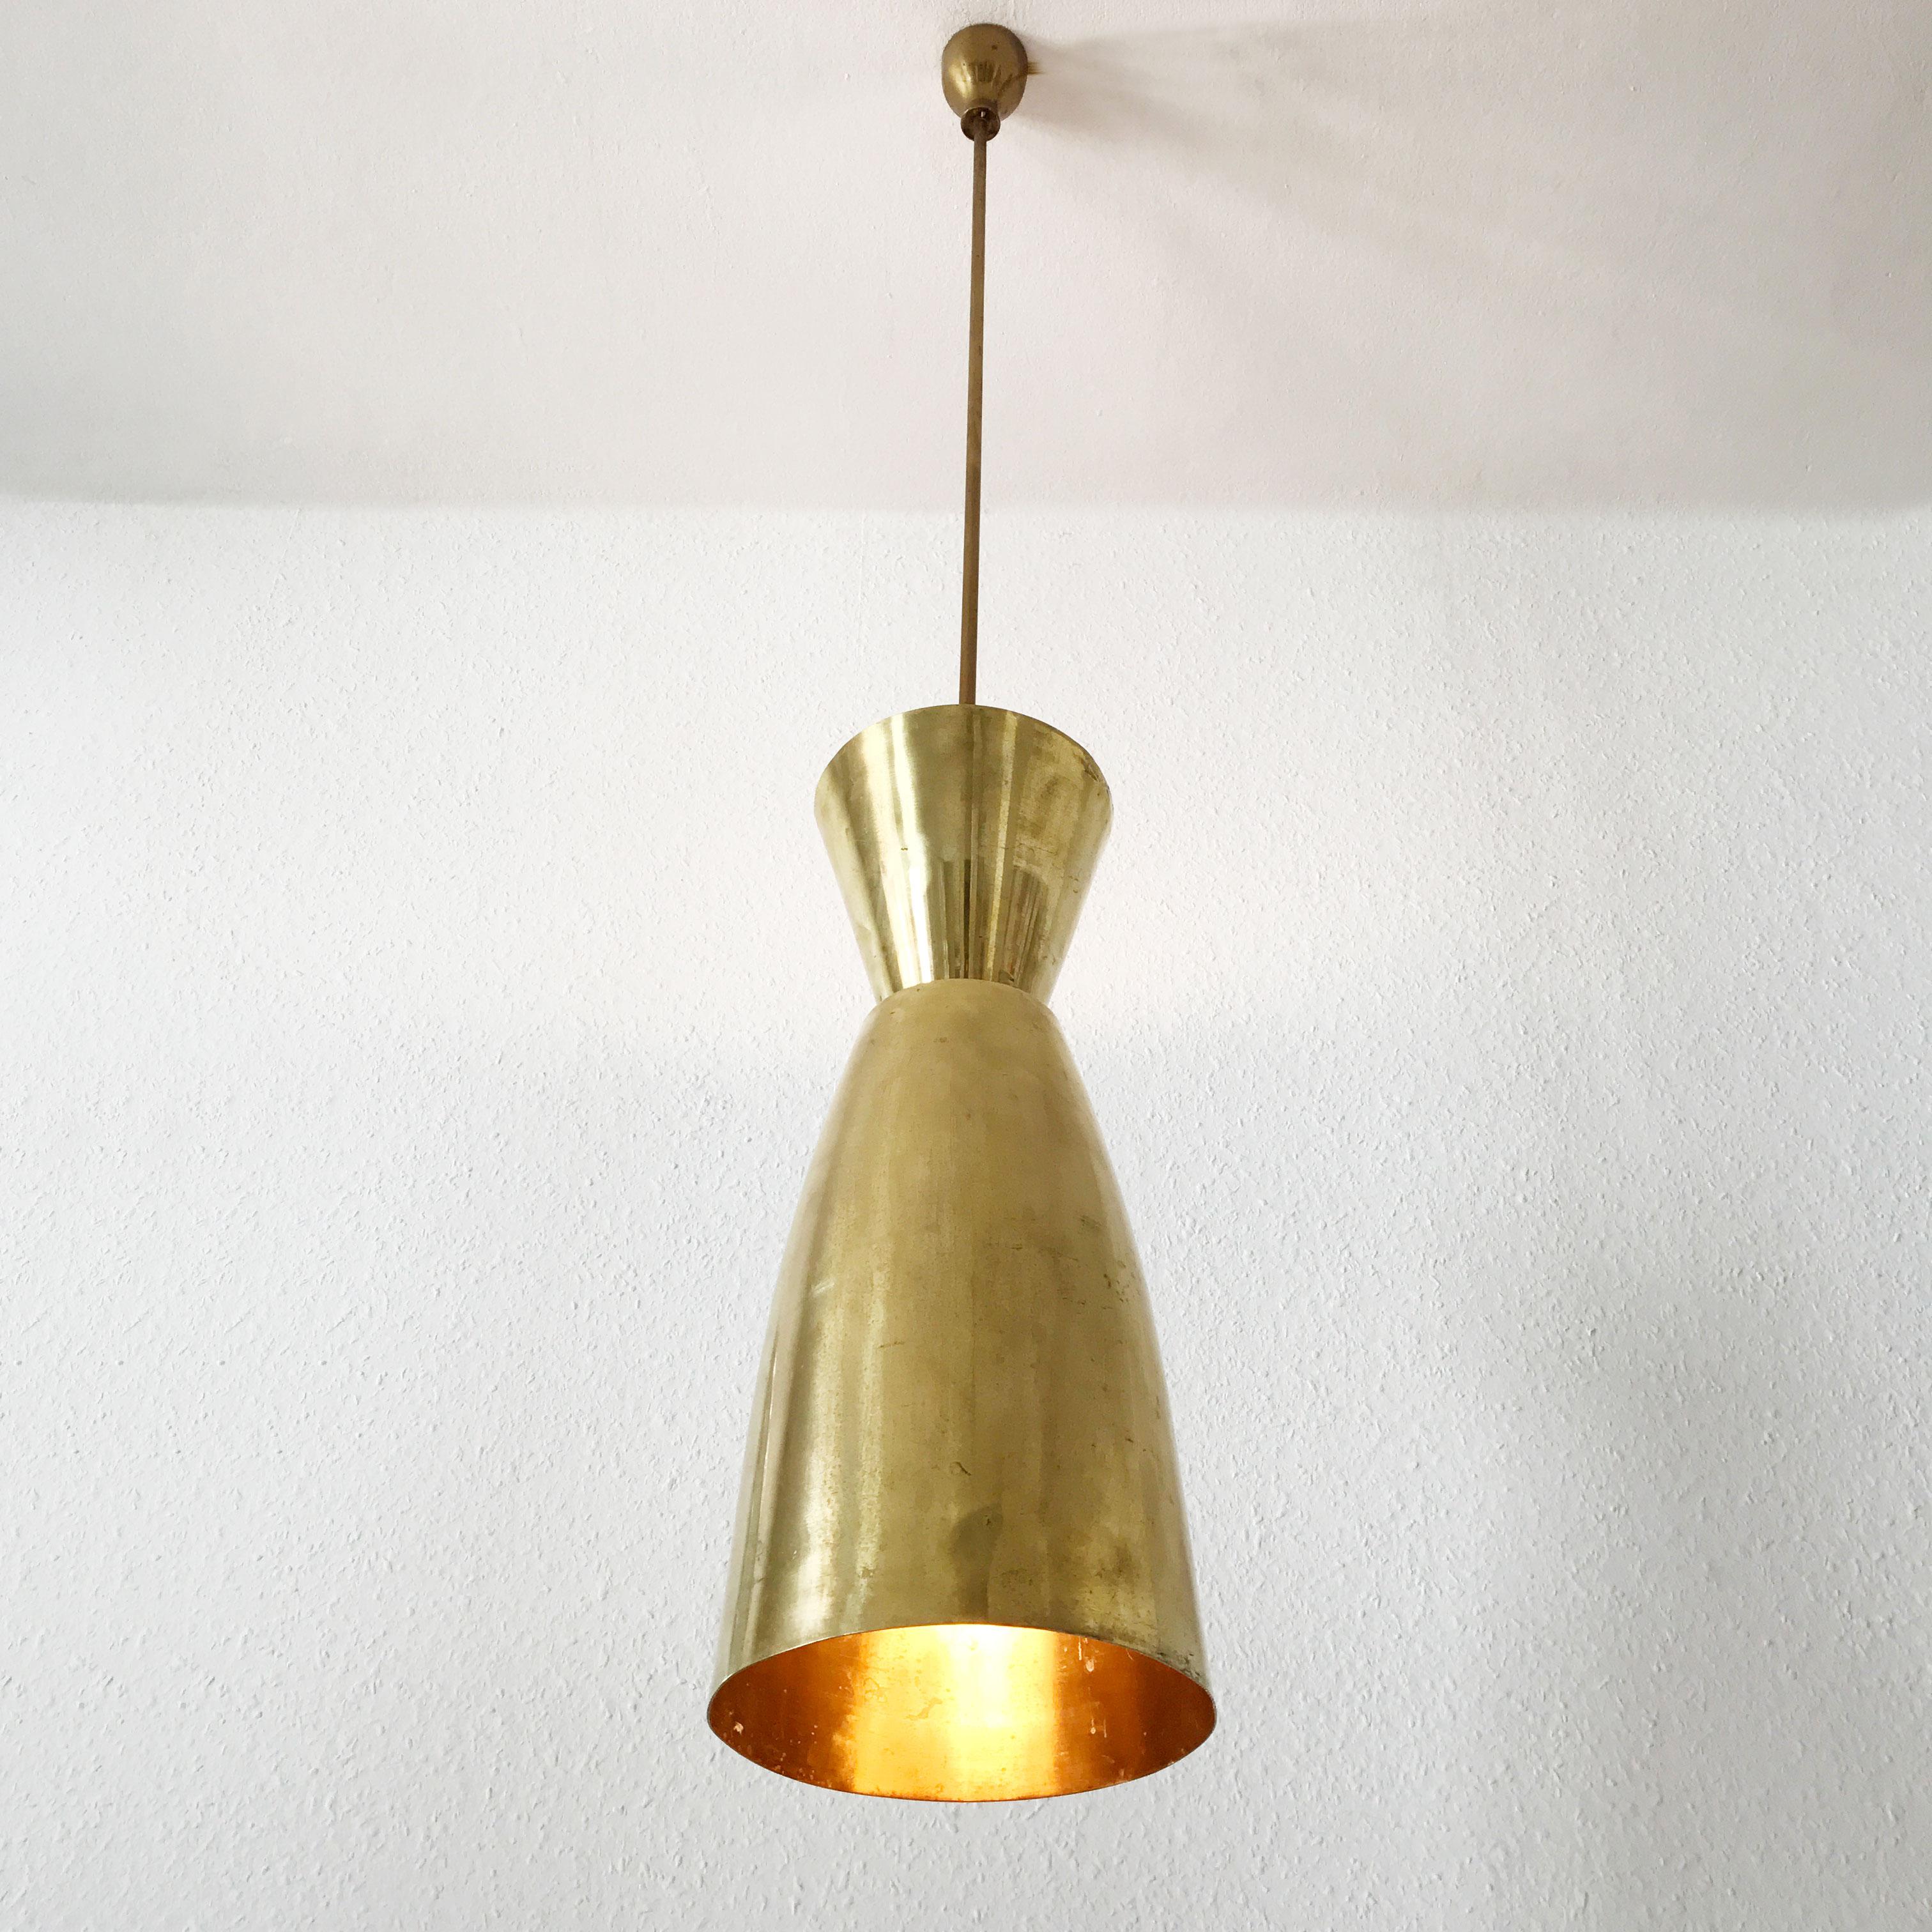 Large Mid-Century Modern Diabolo Brass Pendant Lamp, 1950s, Germany For Sale 1